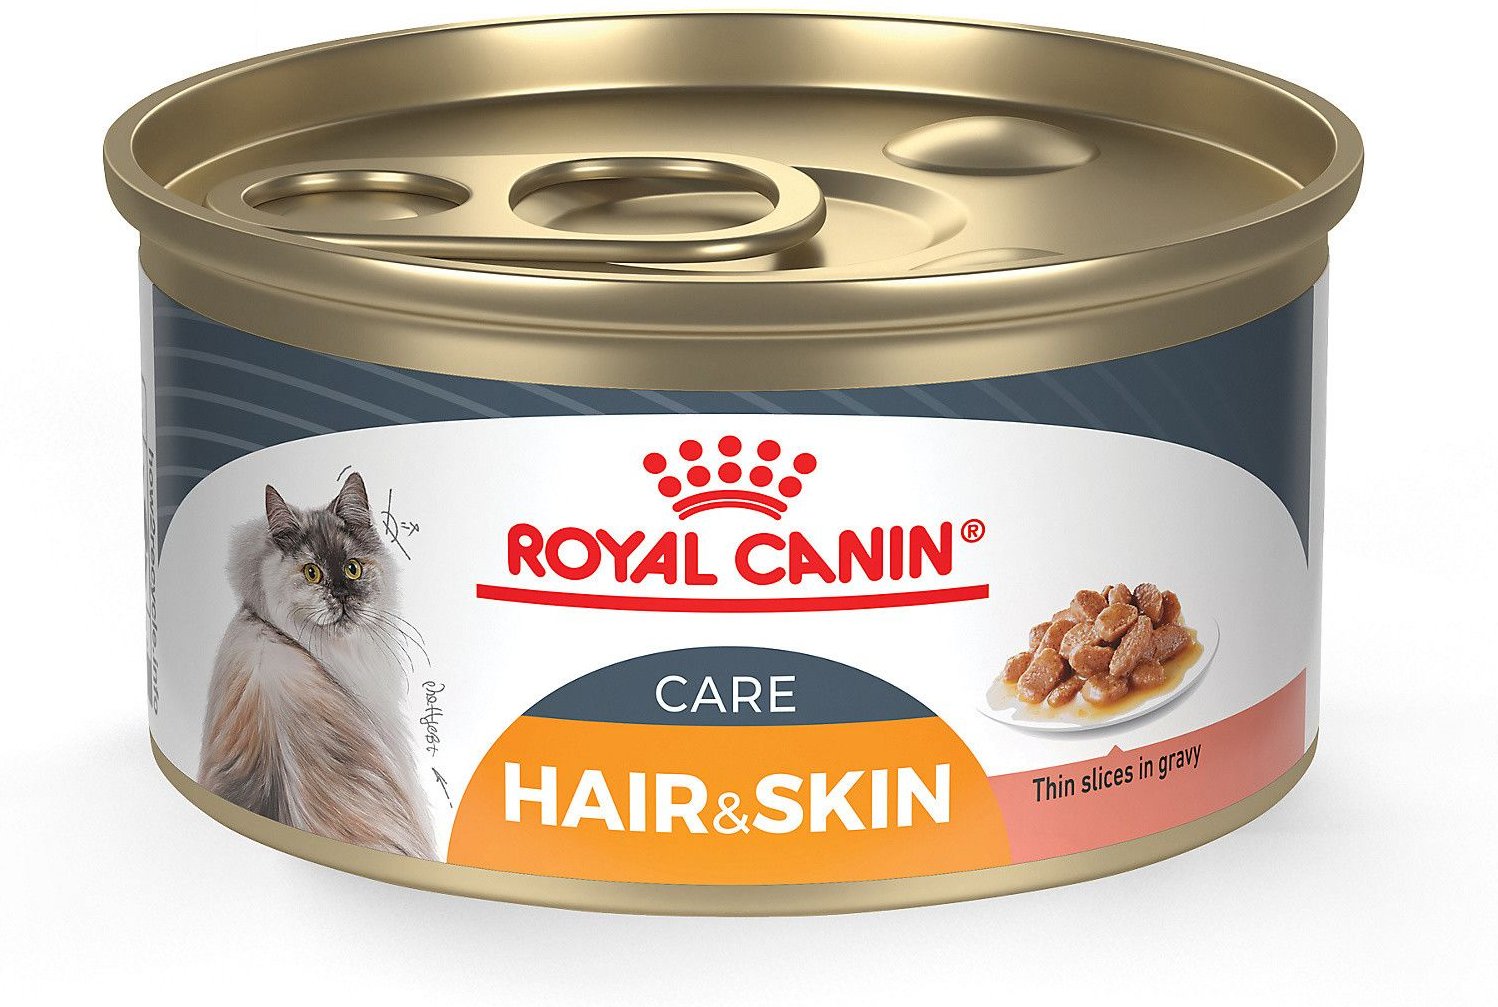 Royal Canin Intense Beauty Thin Slices in Gravy Canned Cat Food, 3oz